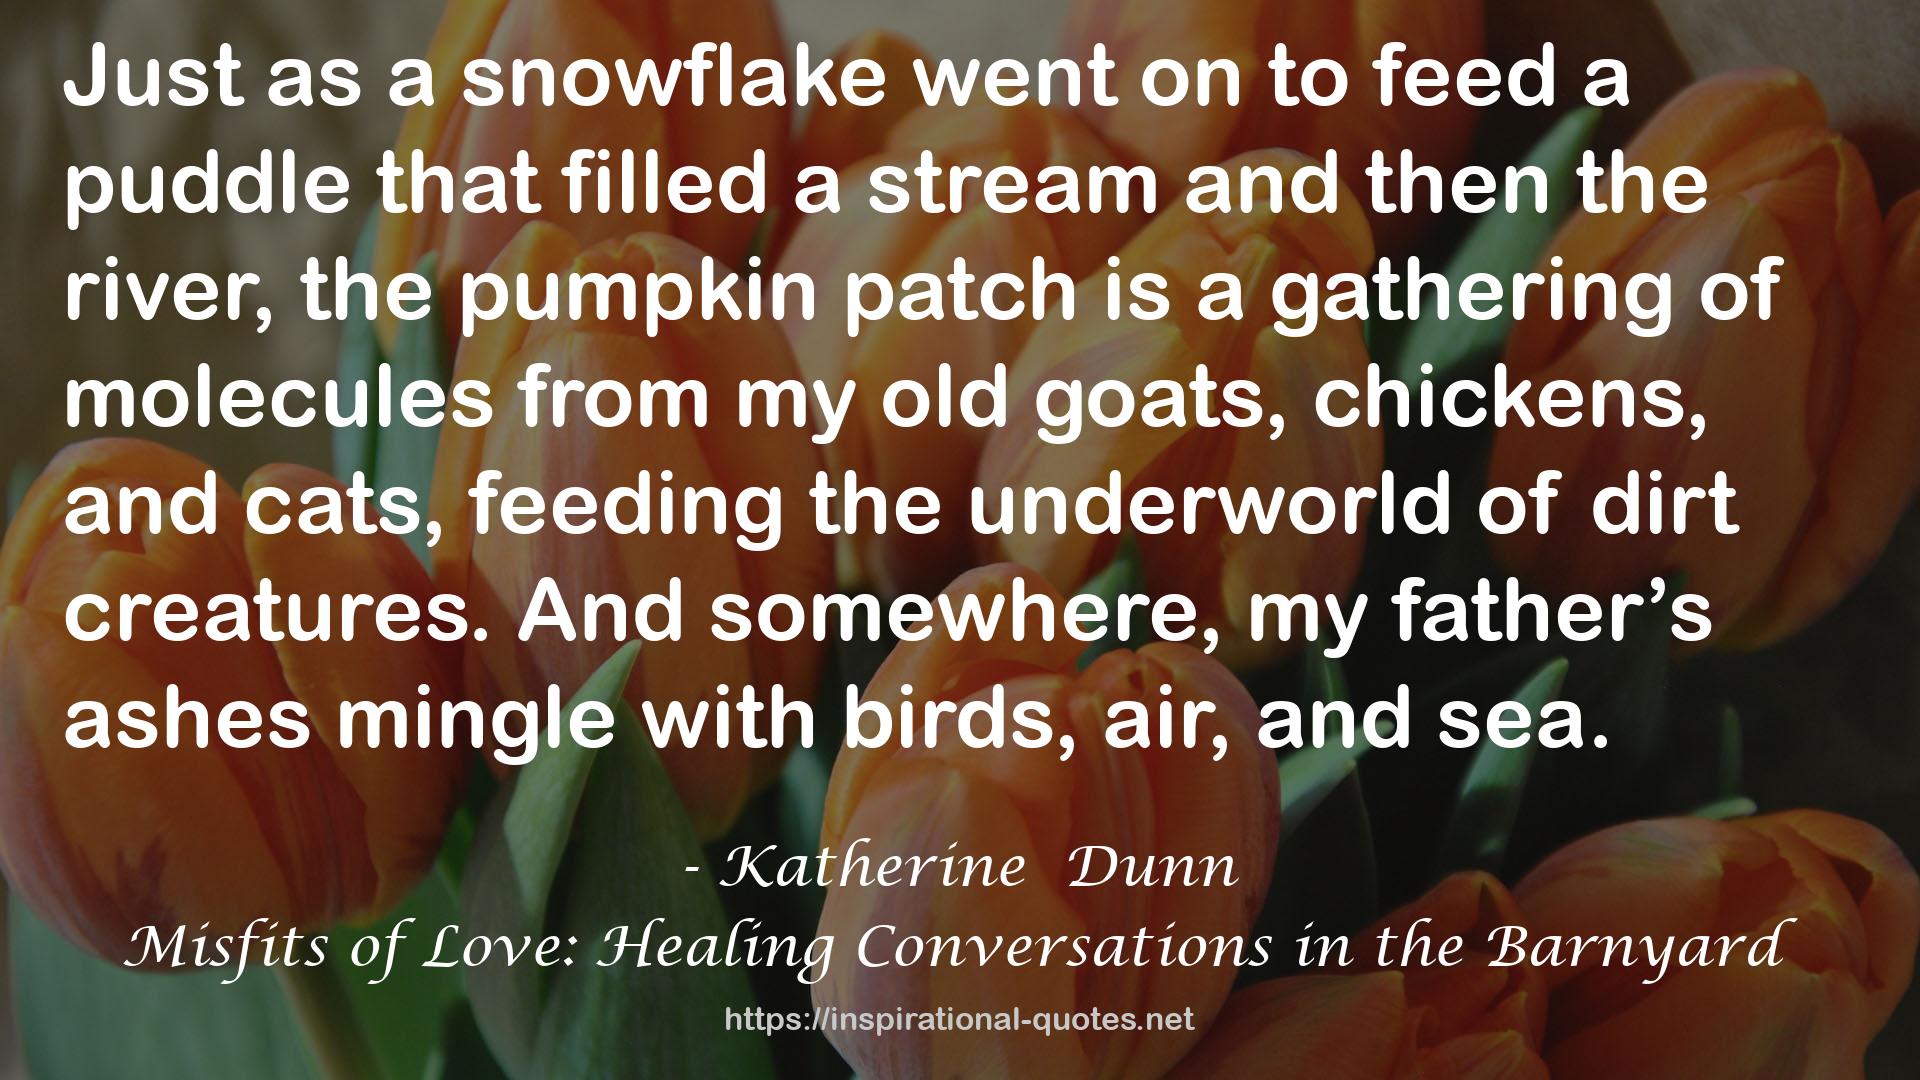 Misfits of Love: Healing Conversations in the Barnyard QUOTES